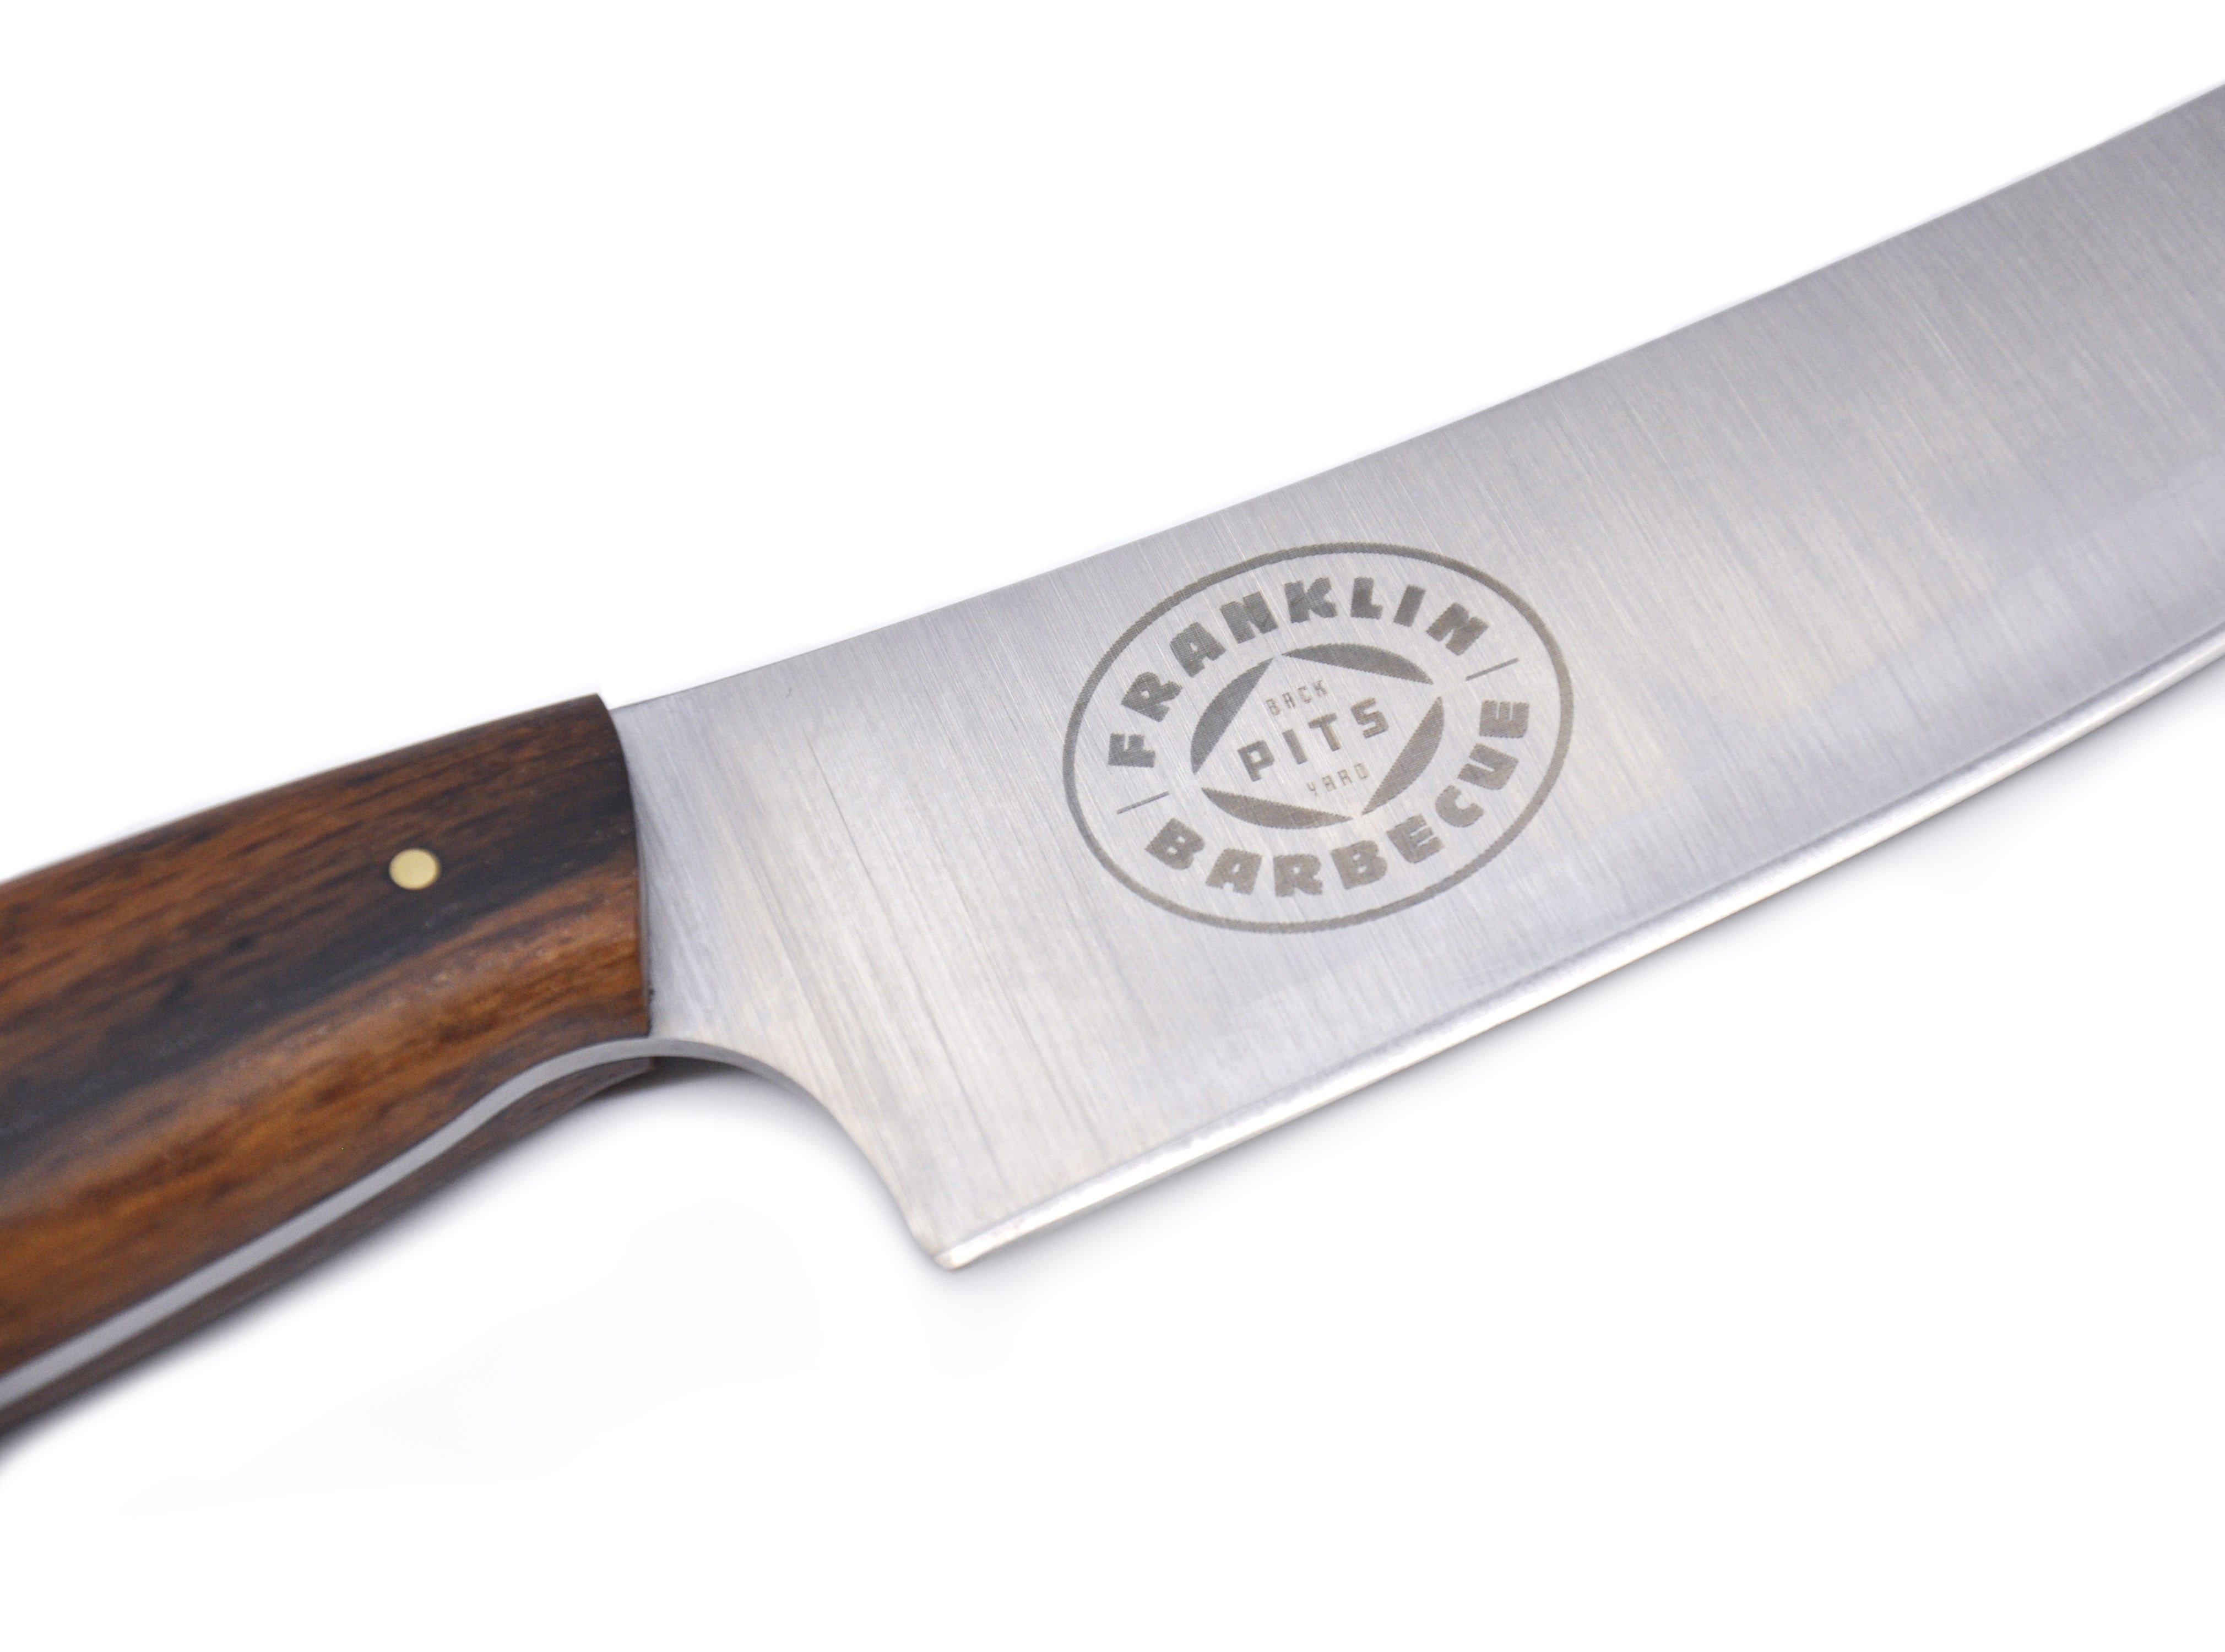 Close up on Franklin Barbecue Pits logo on the stainless steel blade of the Weige Trimming Knife 